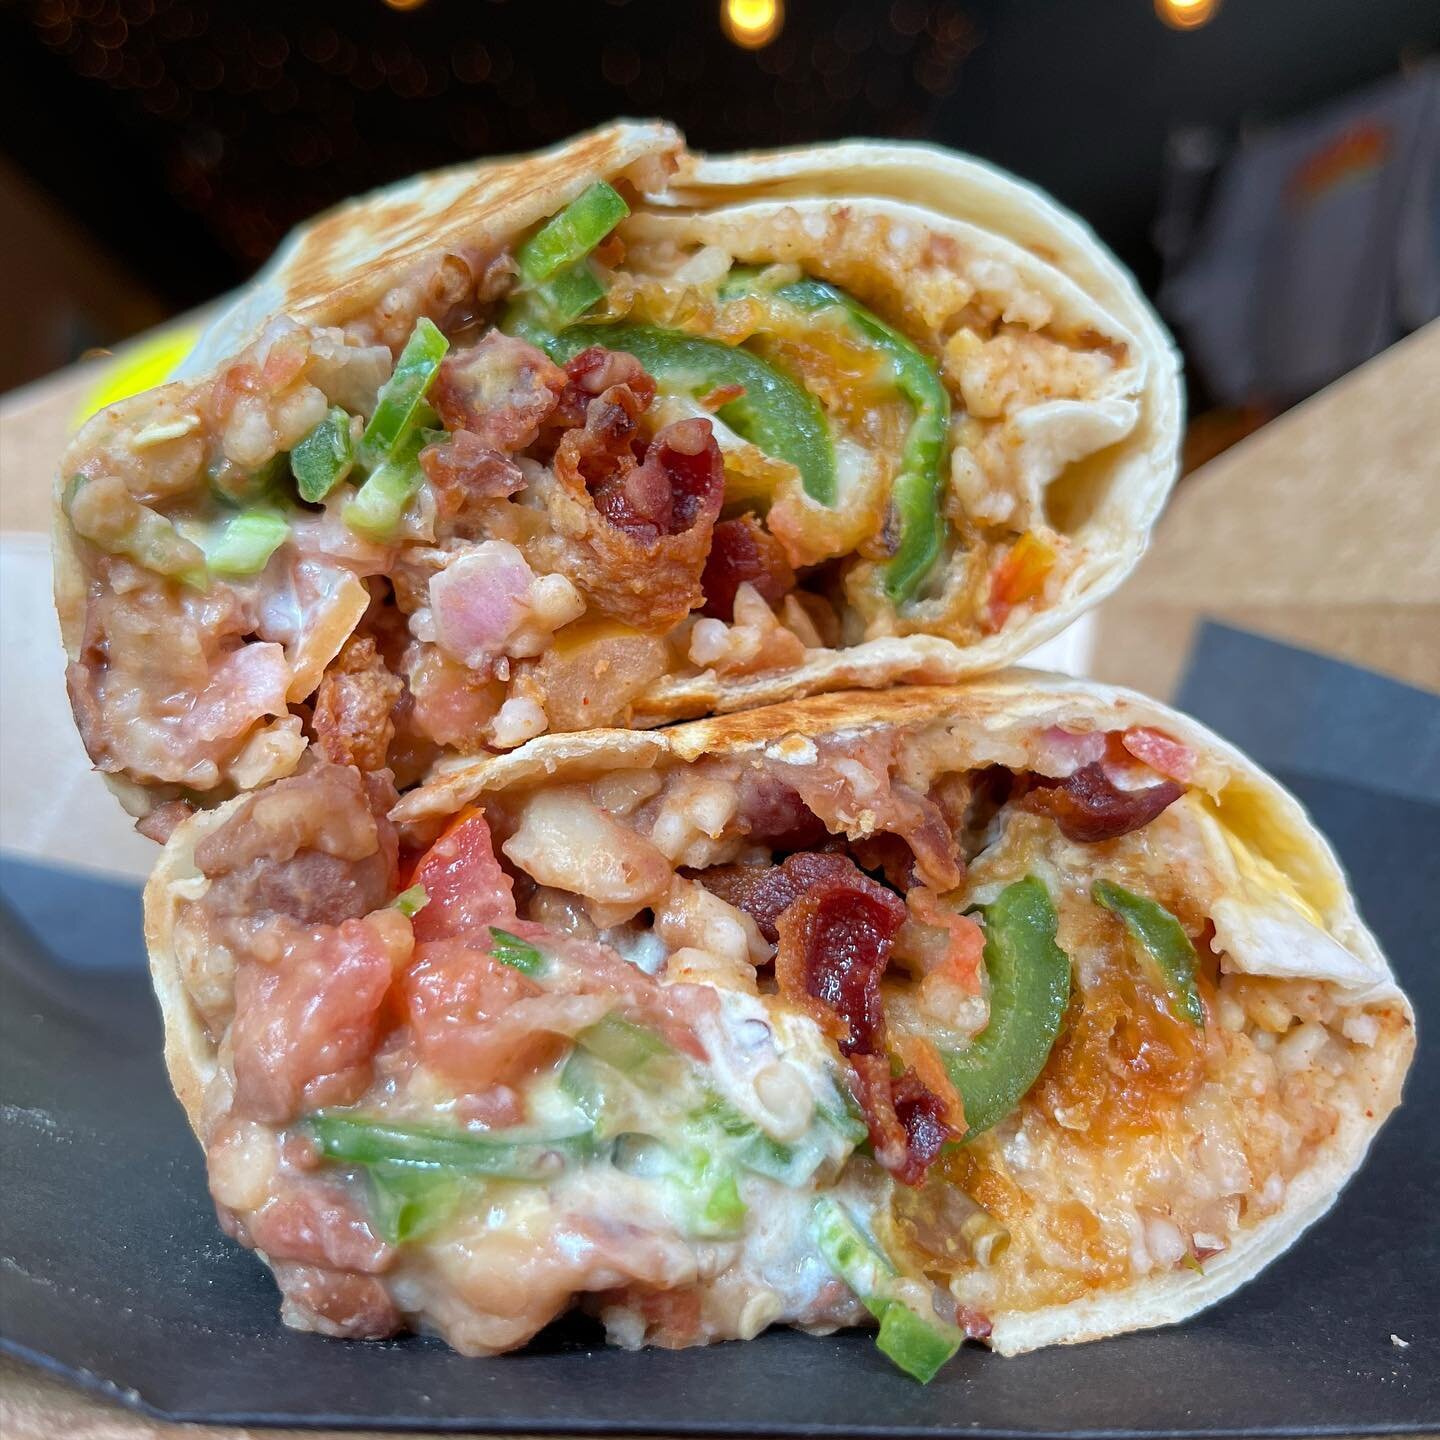 Spice up your week with this Feature Burrito! 🔥

🌯Jalape&ntilde;o Popper Burrito 🌯 
Cheese stuff beer batter fried jalape&ntilde;os, queso sauce, pico de gallo, bacon, sour cream, rice, and beans! 

Available now on UberEats as our &ldquo;Feature 